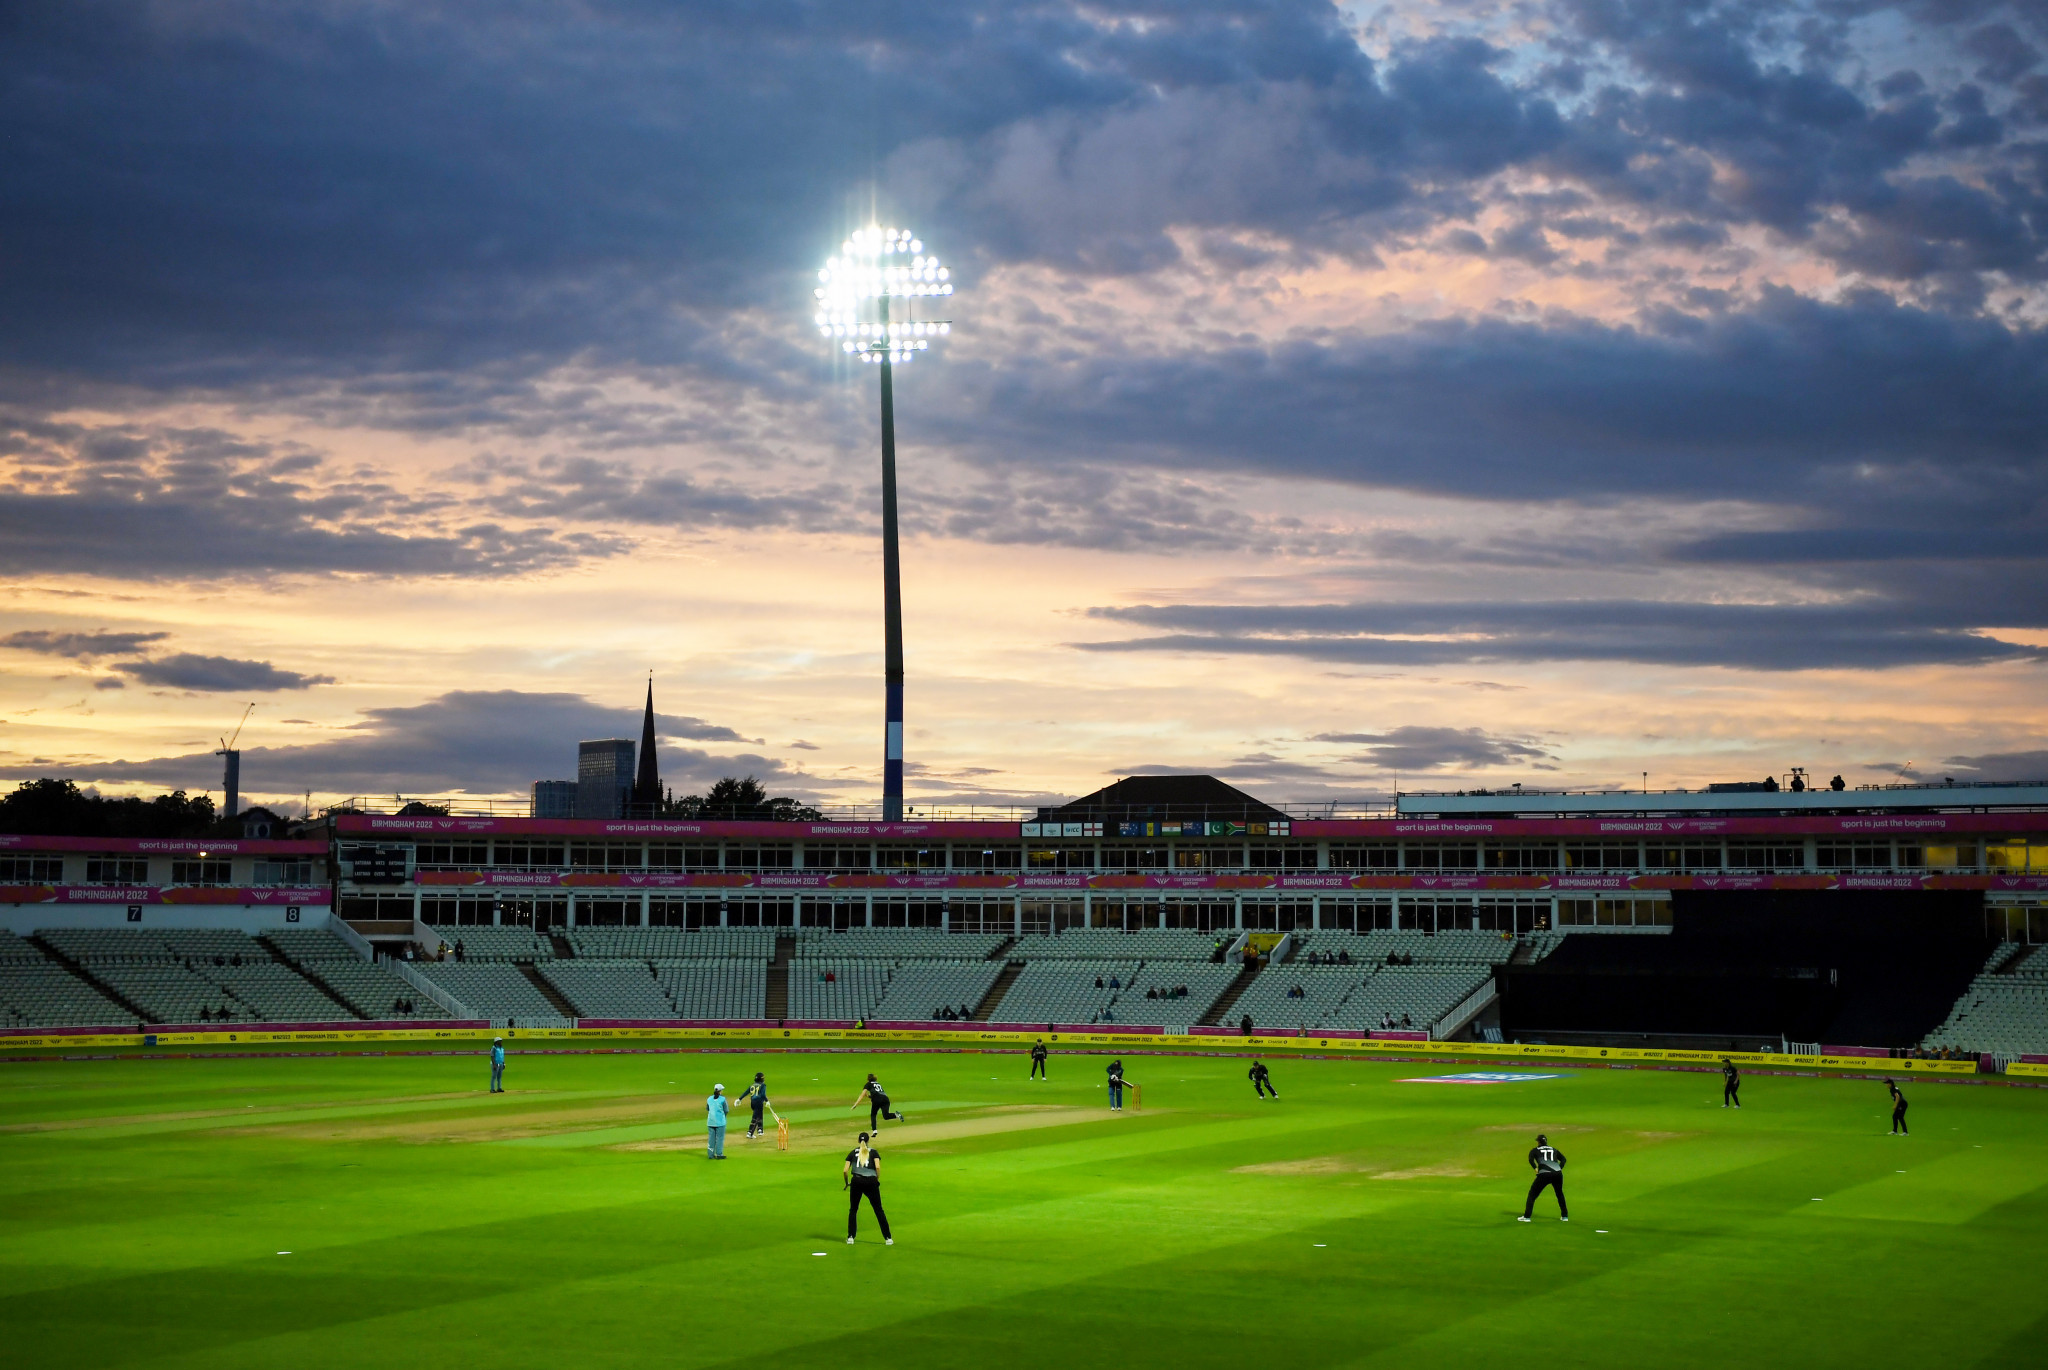 England and New Zealand qualify for T20 cricket semi-finals at Birmingham 2022